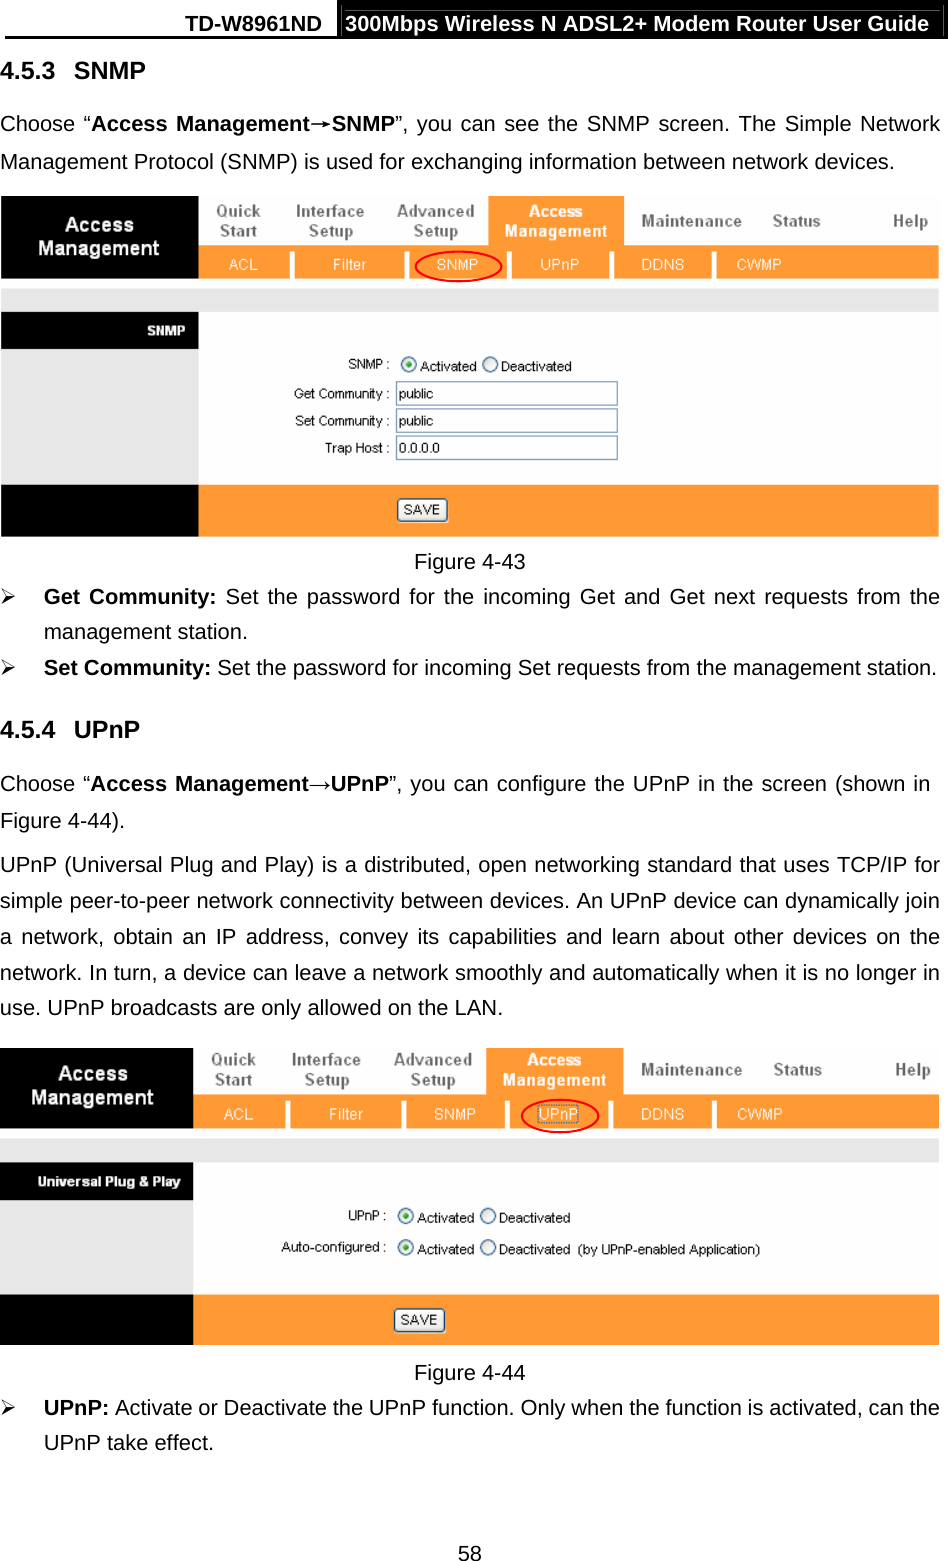 TD-W8961ND  300Mbps Wireless N ADSL2+ Modem Router User Guide  584.5.3  SNMP Choose “Access Management→SNMP”, you can see the SNMP screen. The Simple Network Management Protocol (SNMP) is used for exchanging information between network devices.  Figure 4-43 ¾ Get Community: Set the password for the incoming Get and Get next requests from the management station. ¾ Set Community: Set the password for incoming Set requests from the management station. 4.5.4  UPnP Choose “Access Management→UPnP”, you can configure the UPnP in the screen (shown in Figure 4-44). UPnP (Universal Plug and Play) is a distributed, open networking standard that uses TCP/IP for simple peer-to-peer network connectivity between devices. An UPnP device can dynamically join a network, obtain an IP address, convey its capabilities and learn about other devices on the network. In turn, a device can leave a network smoothly and automatically when it is no longer in use. UPnP broadcasts are only allowed on the LAN.  Figure 4-44 ¾ UPnP: Activate or Deactivate the UPnP function. Only when the function is activated, can the UPnP take effect. 